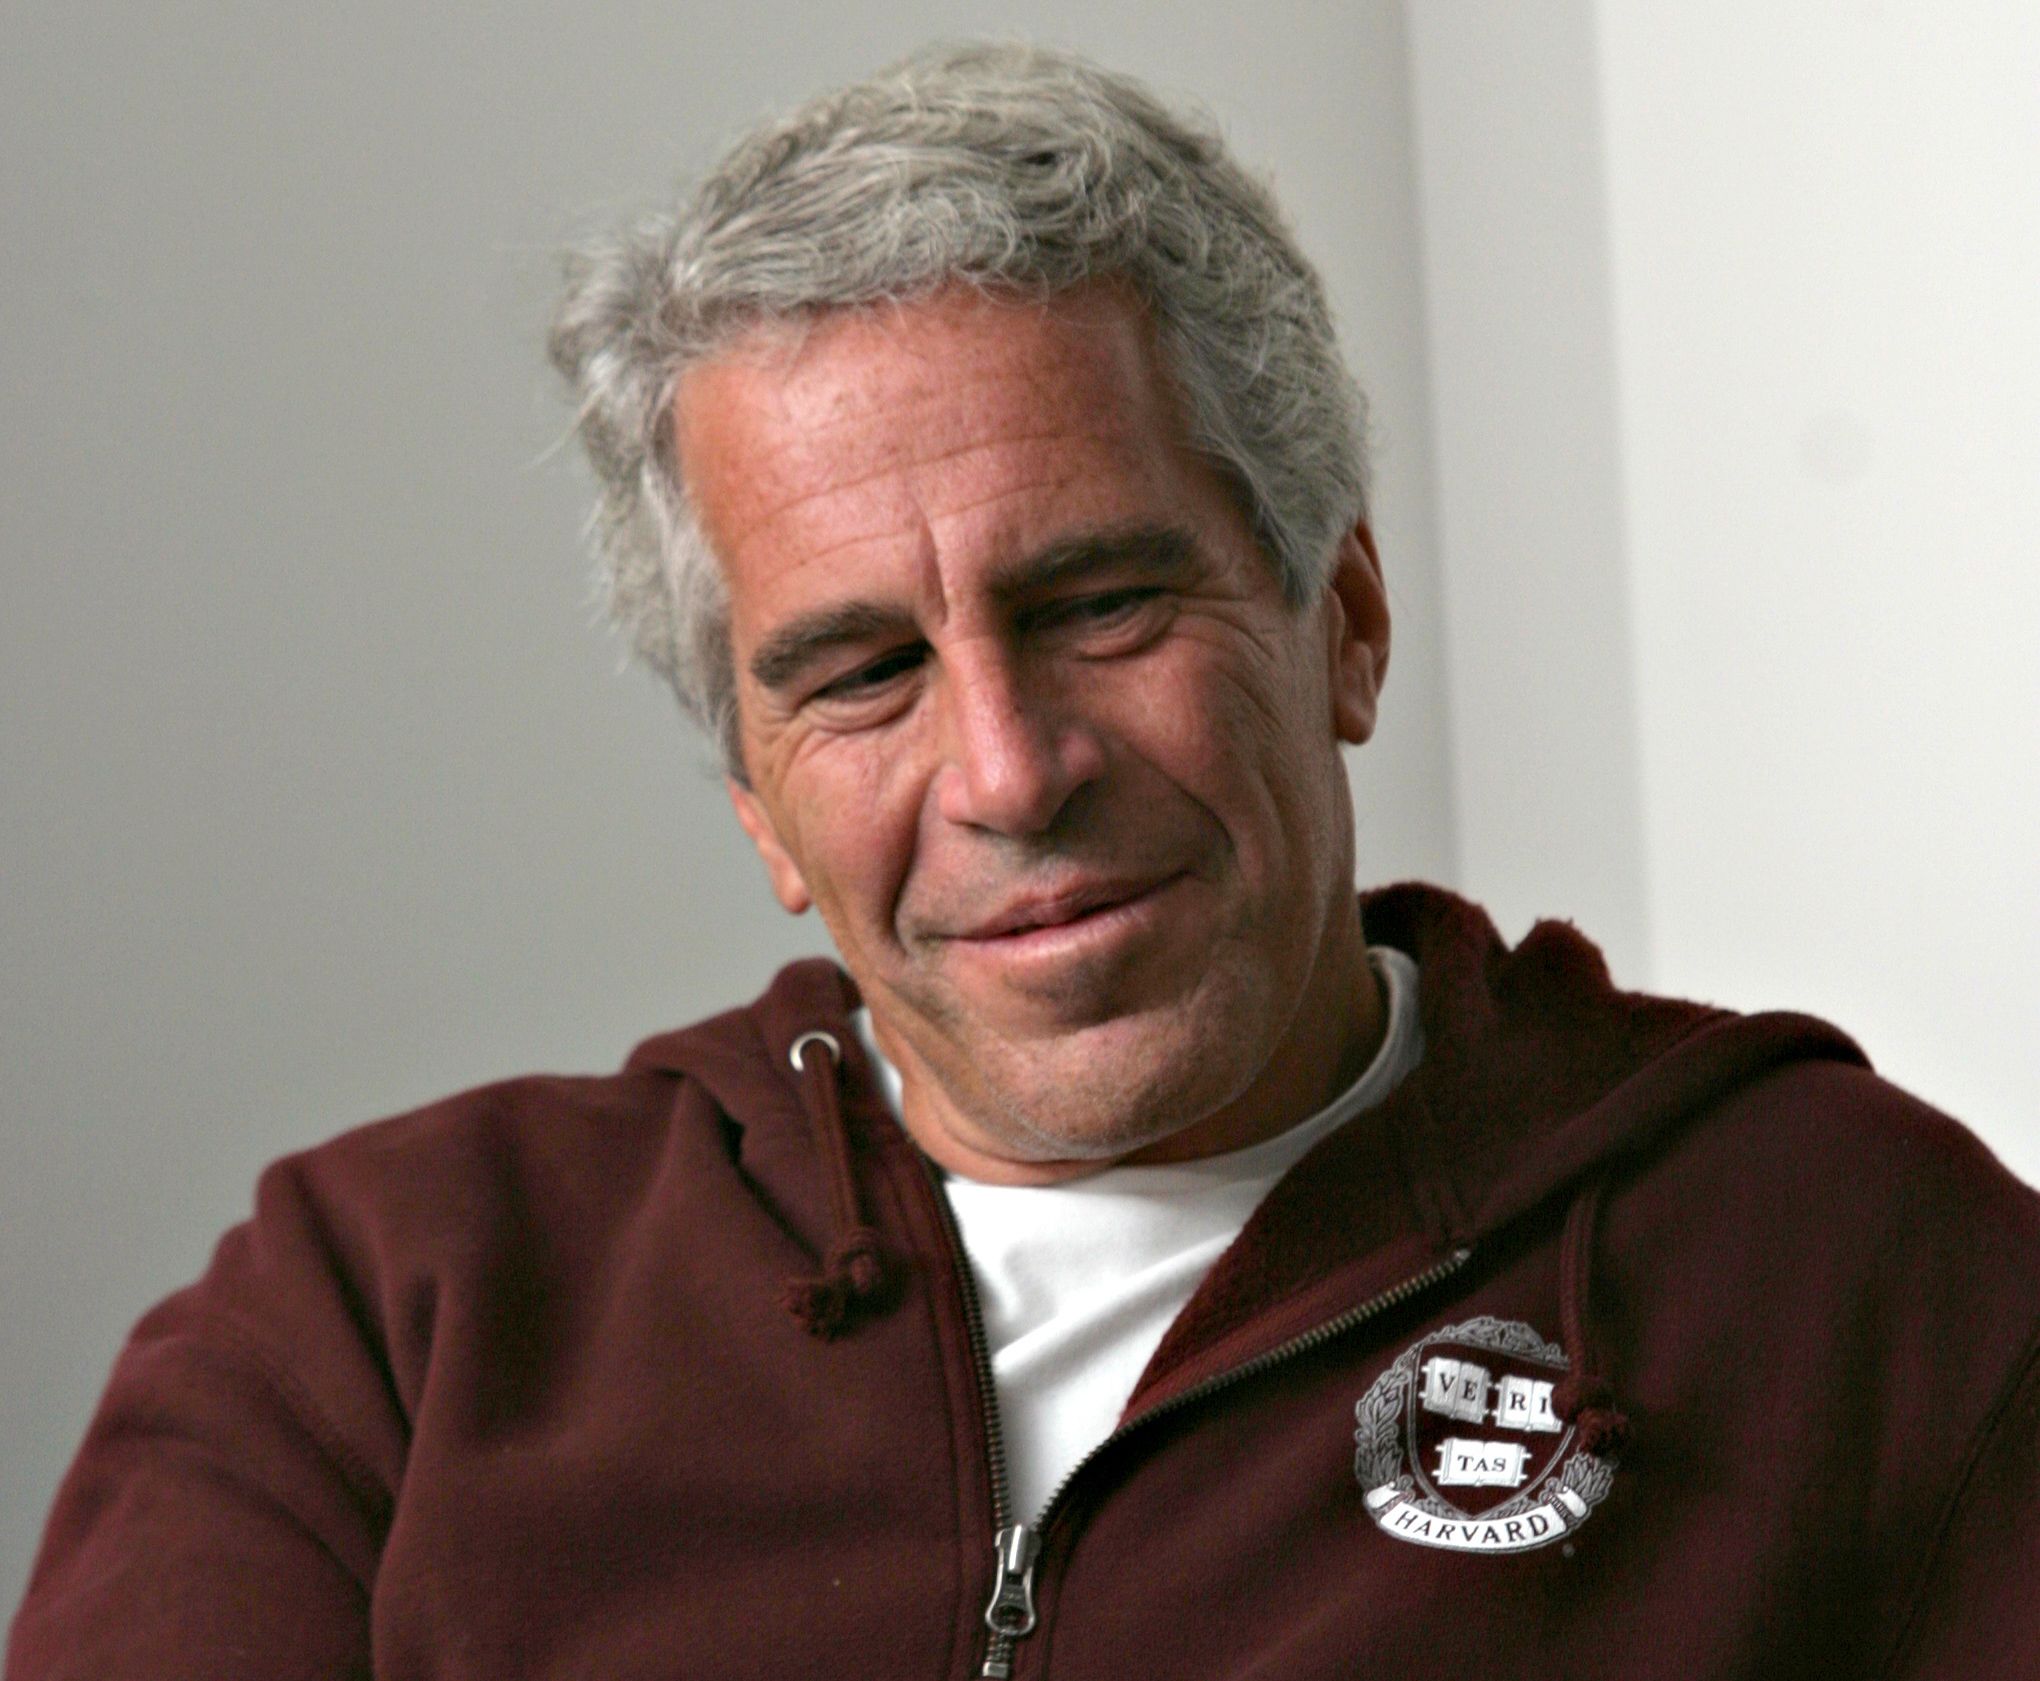 L Brands taps law firm to review relationship with Jeffrey Epstein